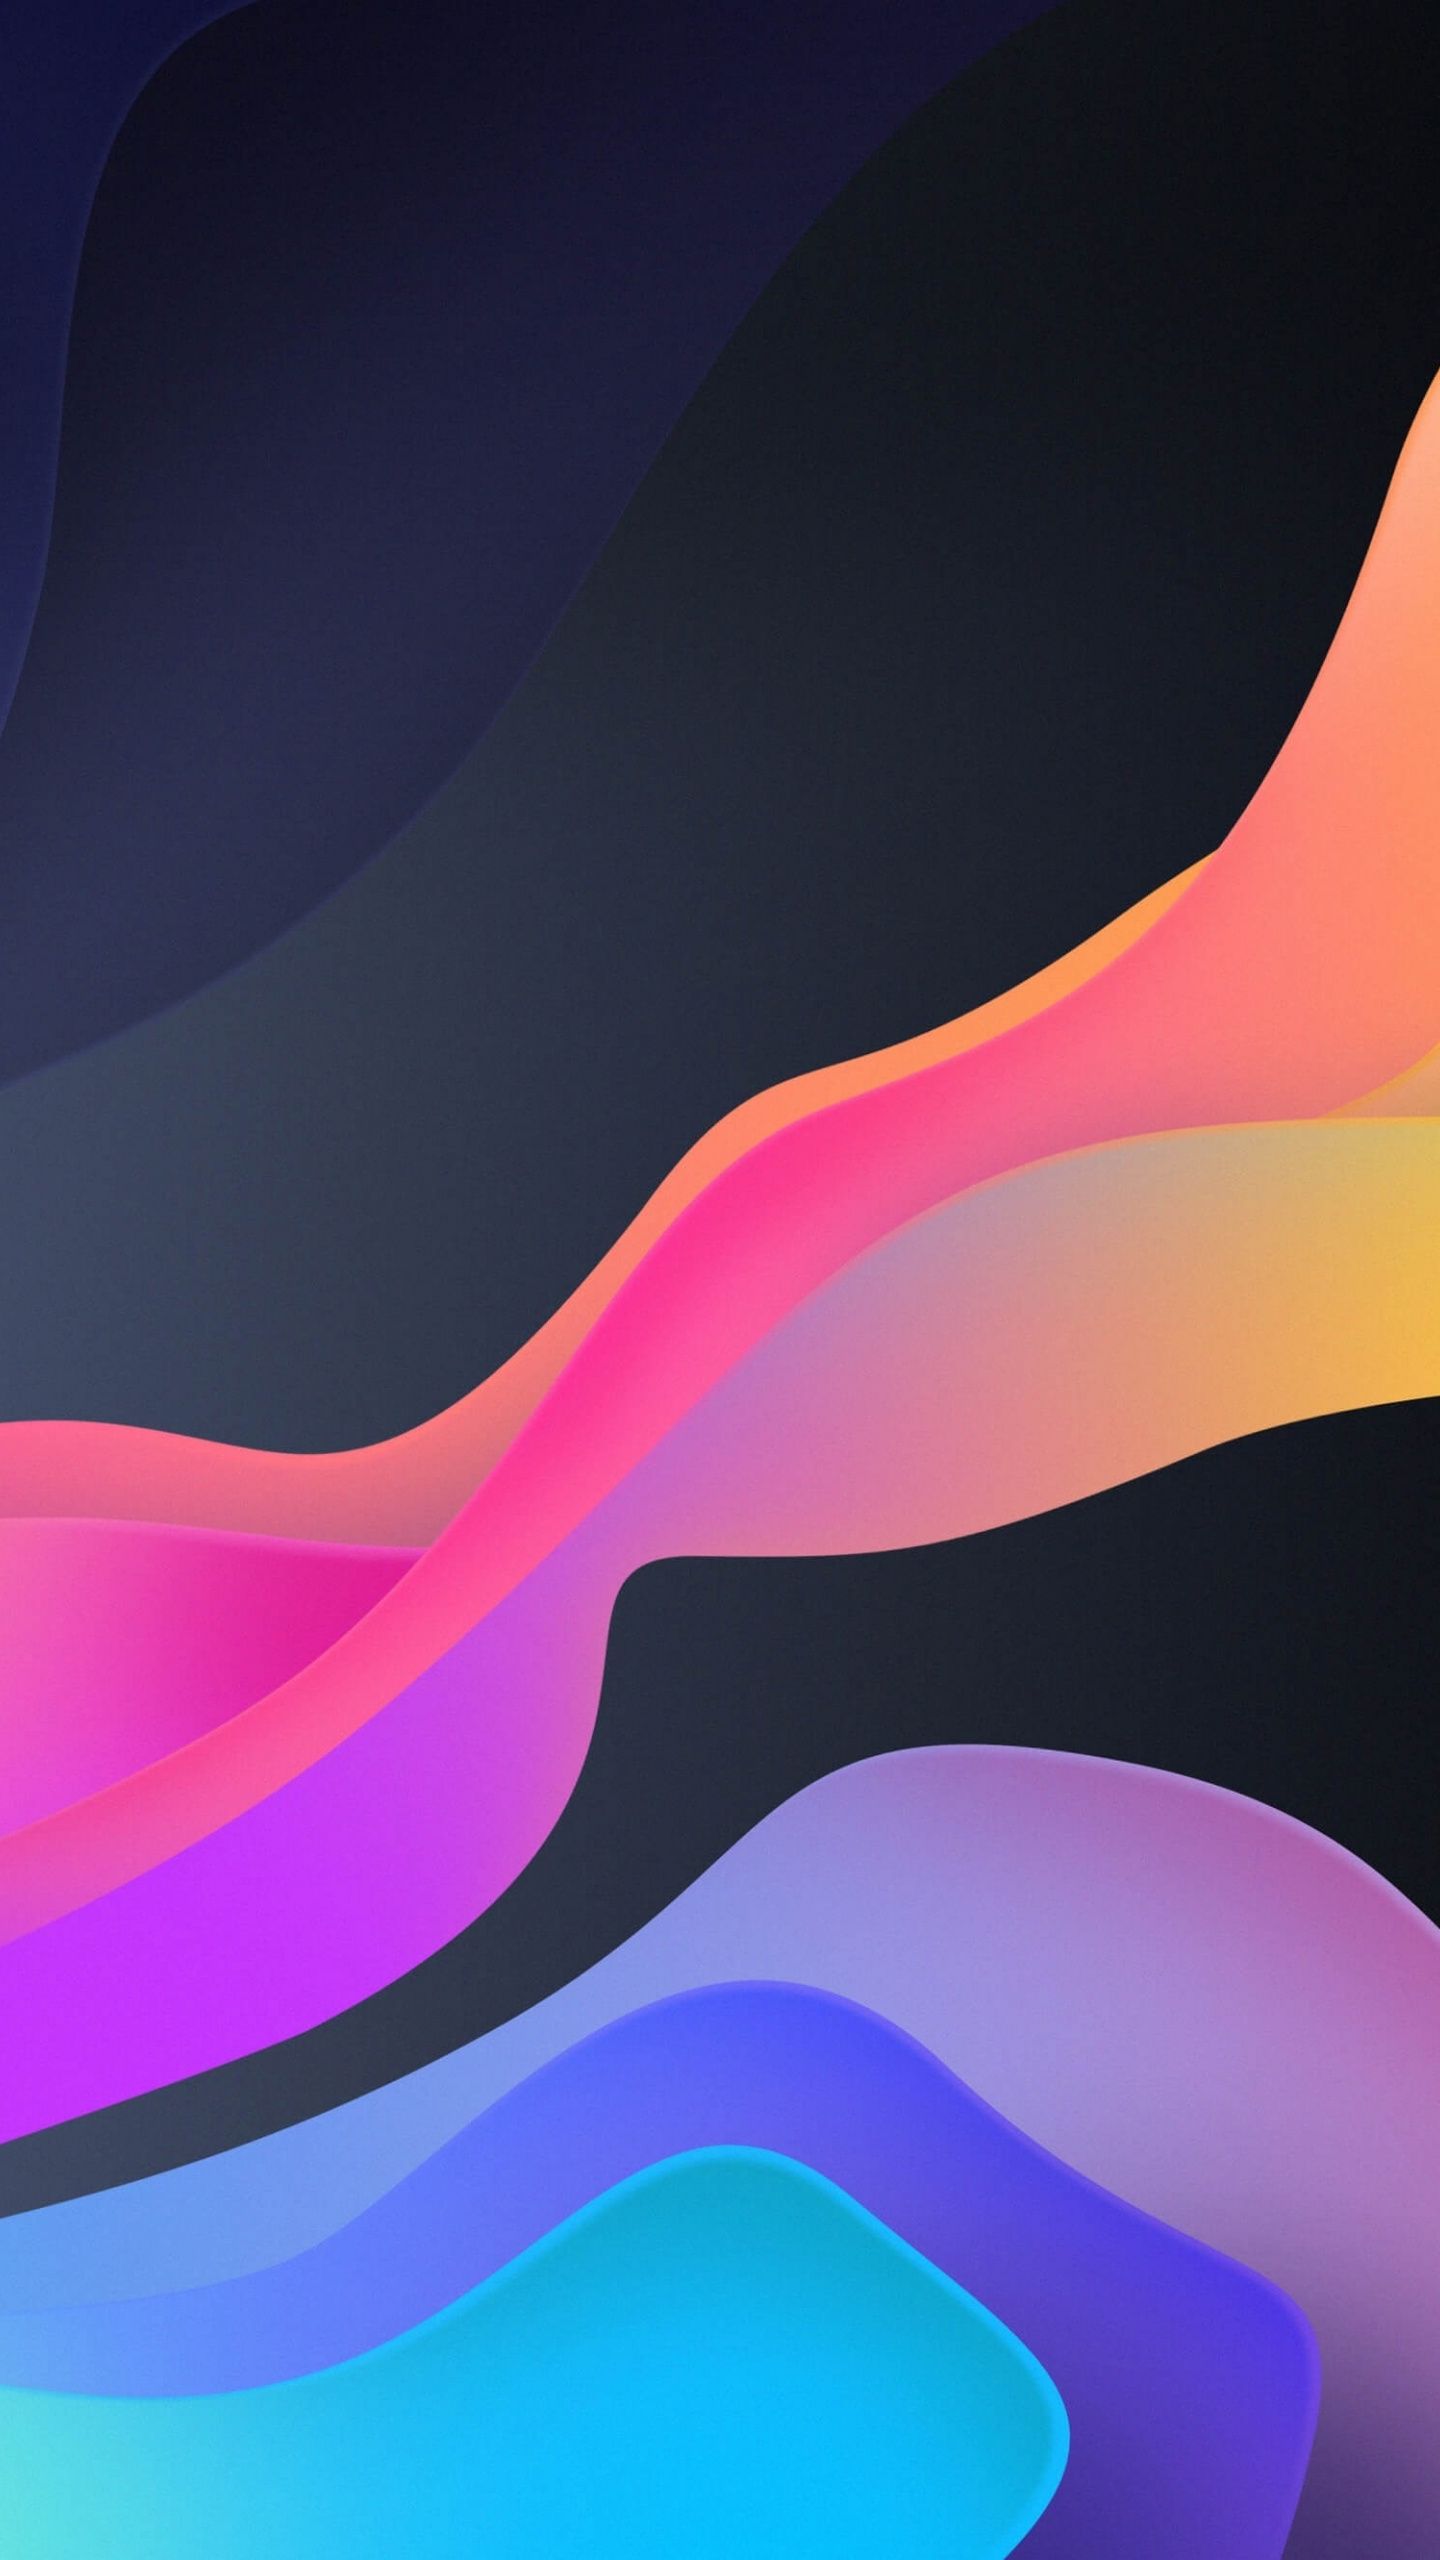 Download 1440x2560 wallpaper Waves, flow, fluid, colorful, art, QHD Samsung Galaxy S S Edge, N. Abstract iphone wallpaper, Samsung wallpaper, Mobile wallpaper